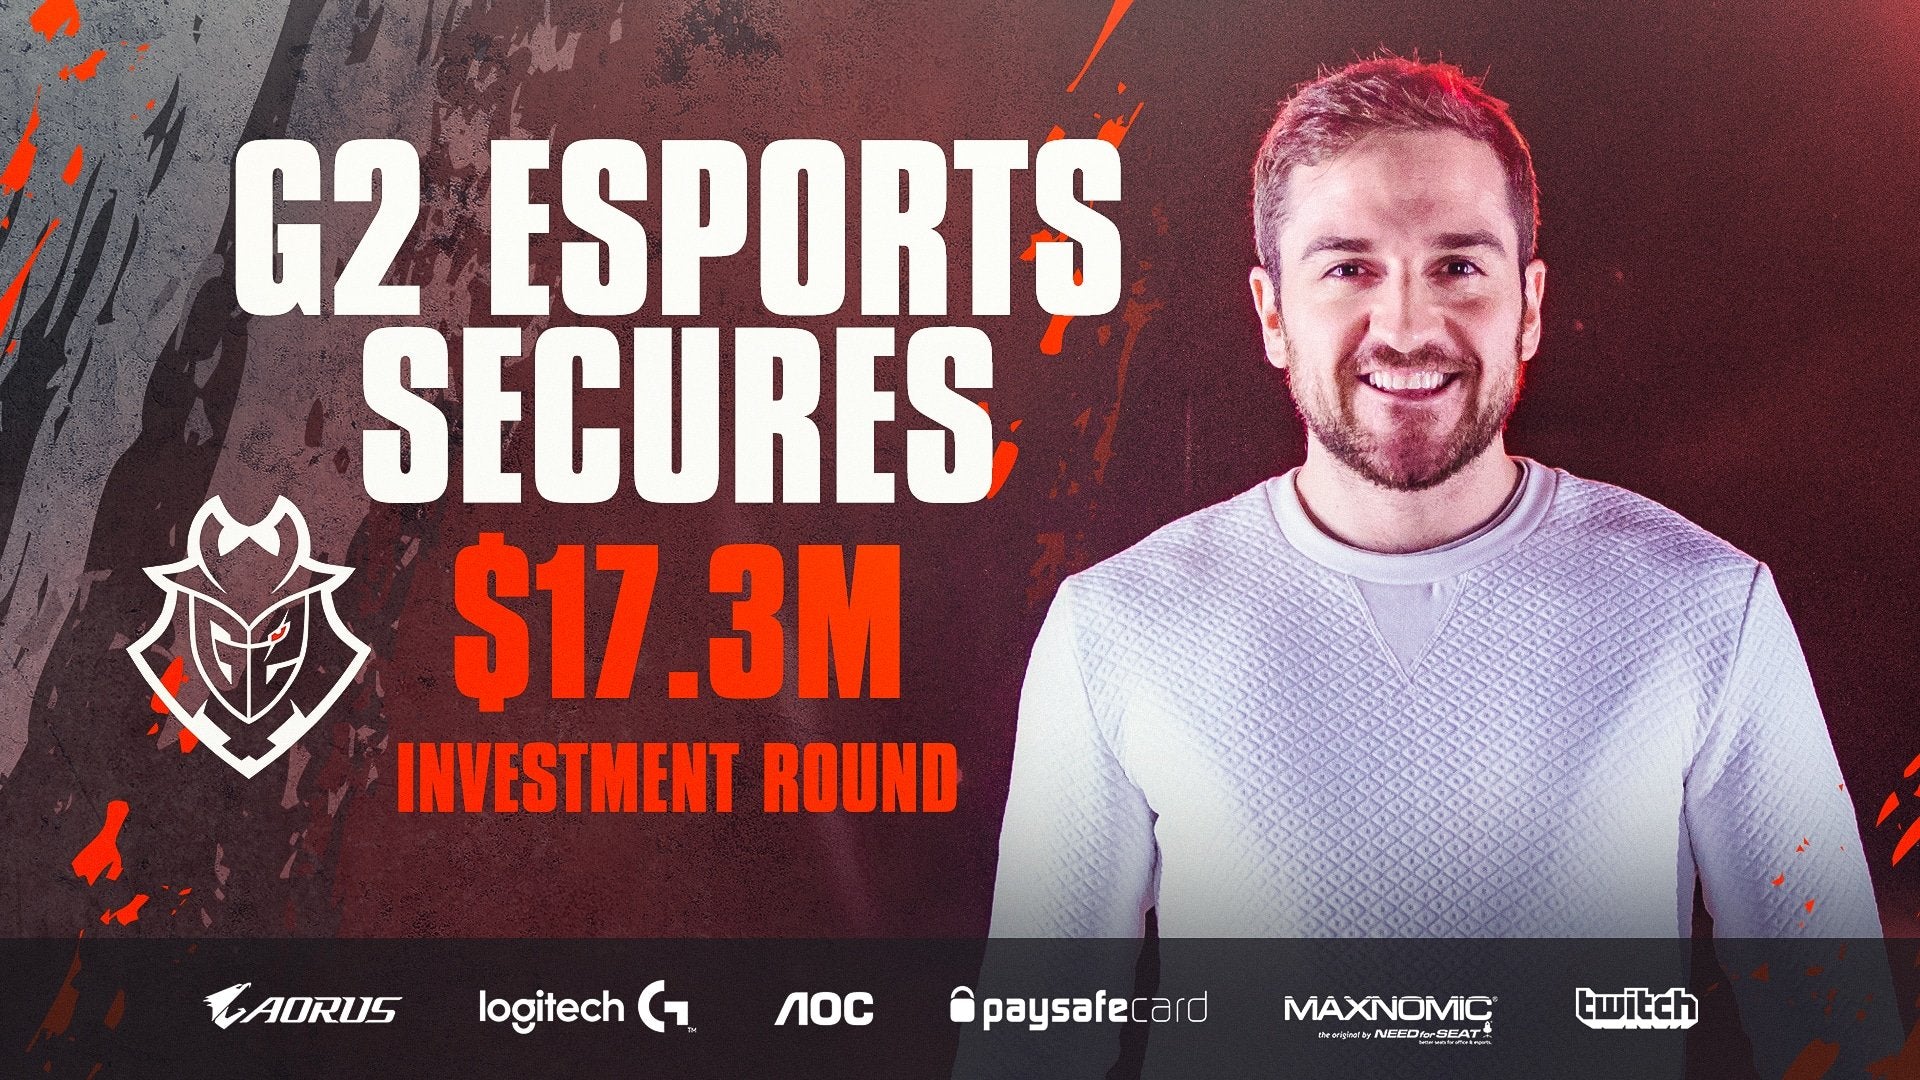 G2 Esports Secures $17.3M Investment Round